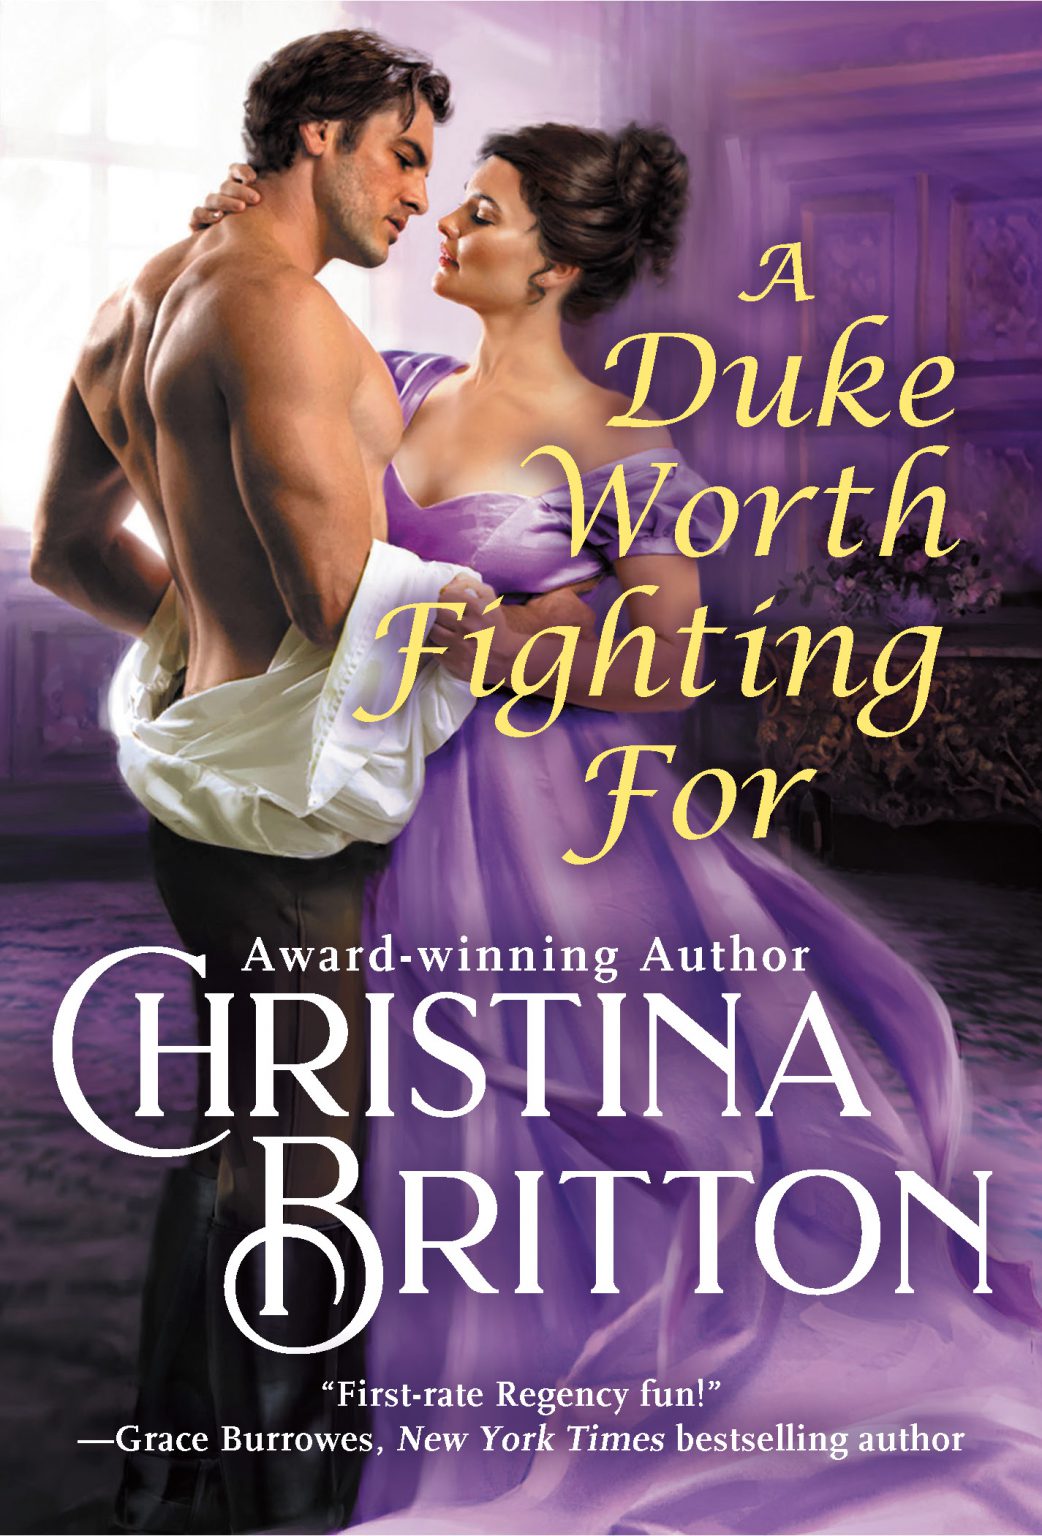 with love in sight by christina britton